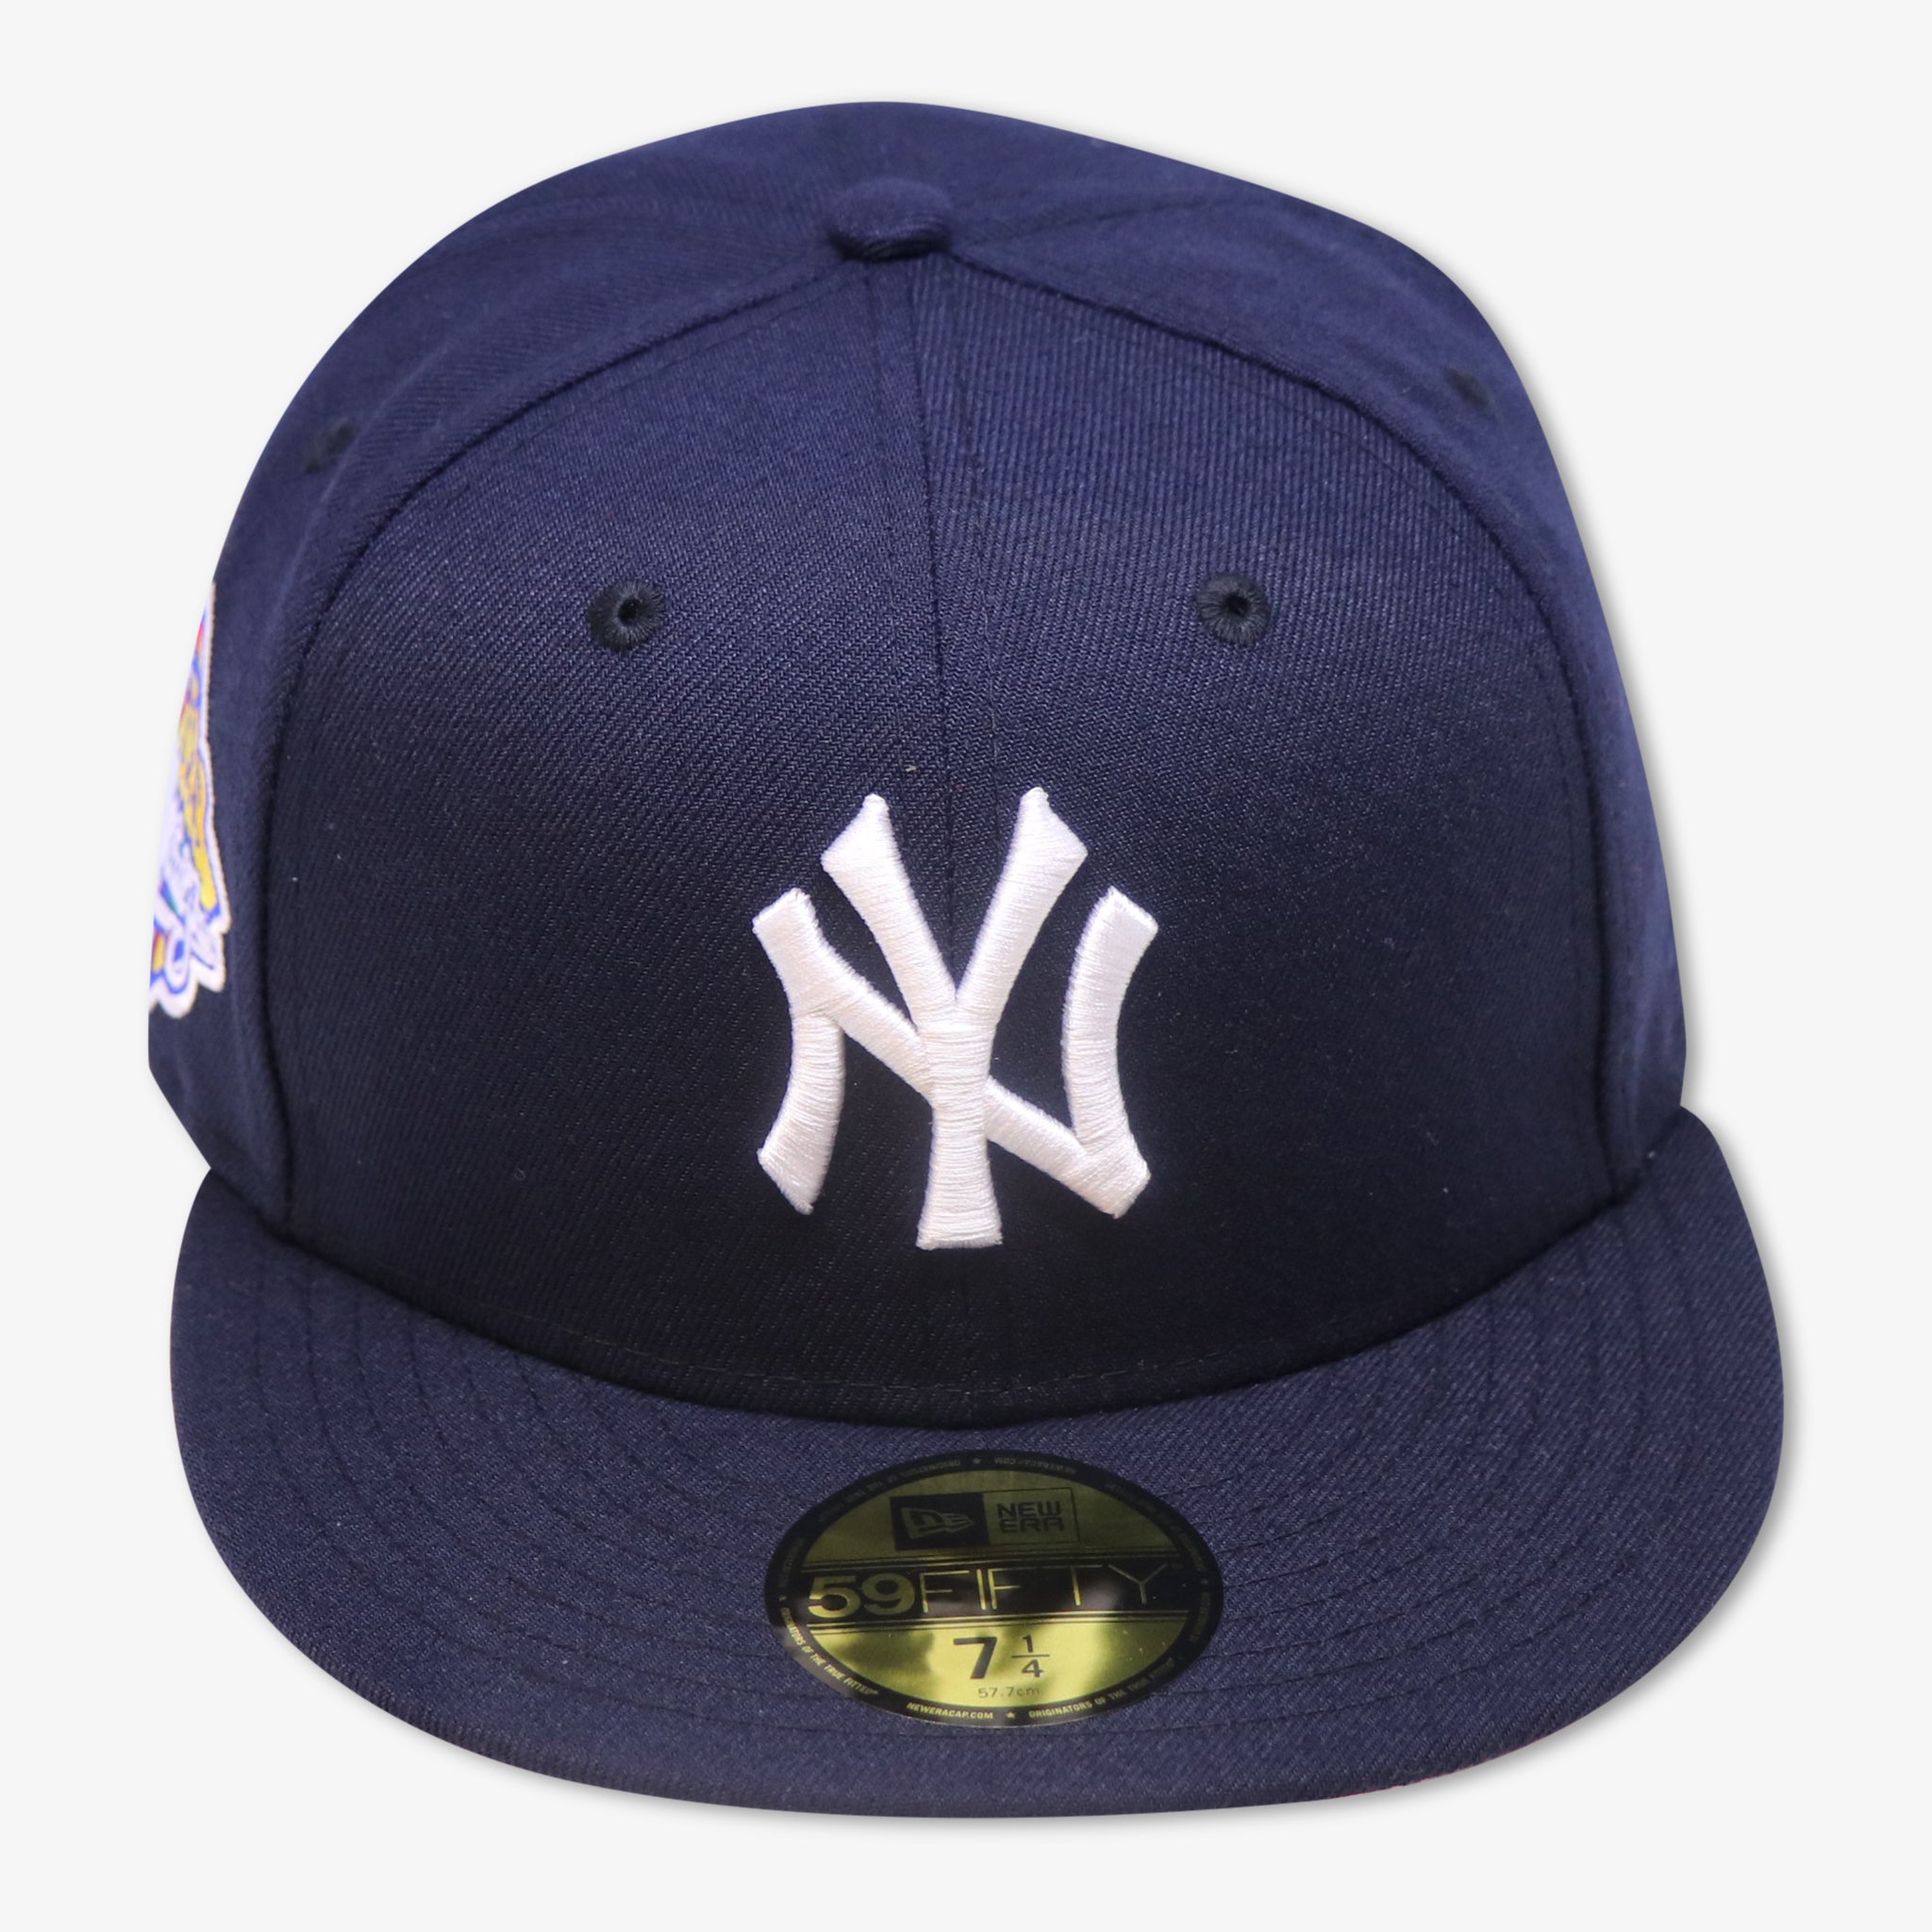 NEW YORK YANKEES "1999 WORLDSERIES" NEW ERA 59FIFTY FITTED (SKY BLUE BOTTOM)